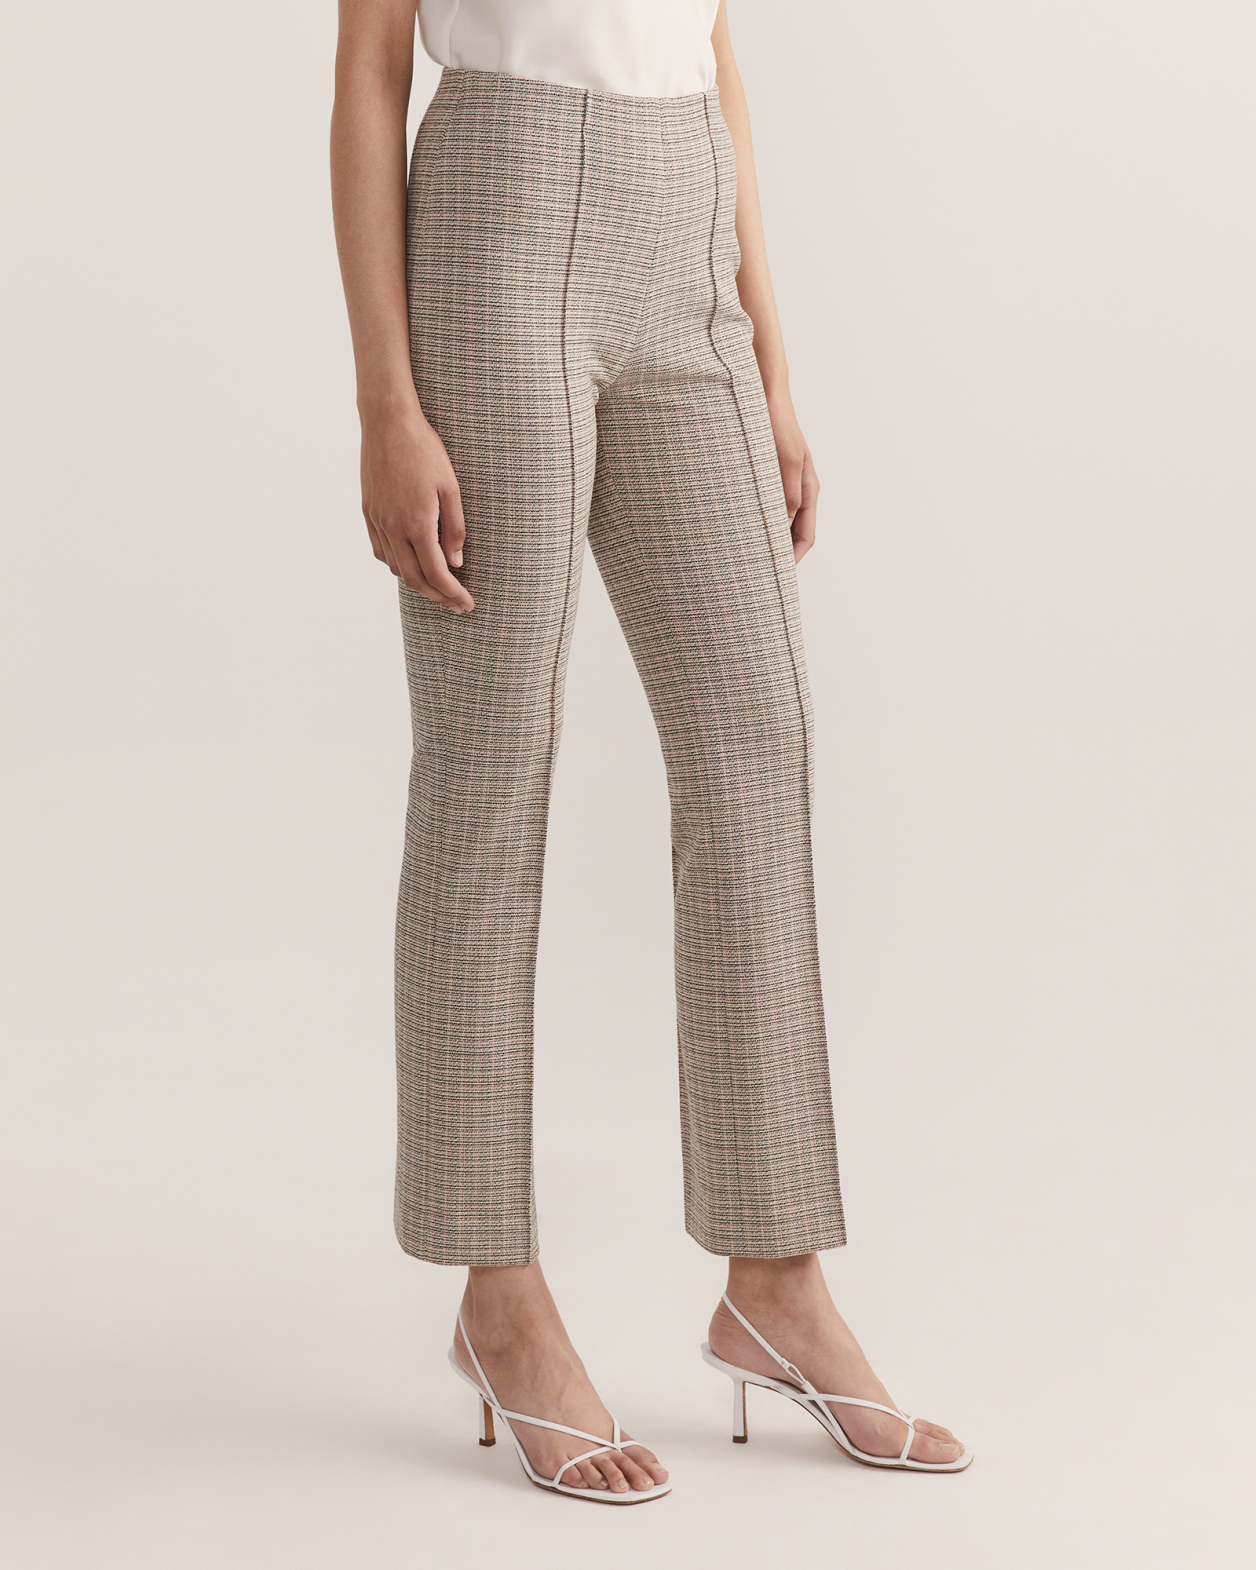 Isla Check Pull On Pant in MULTI